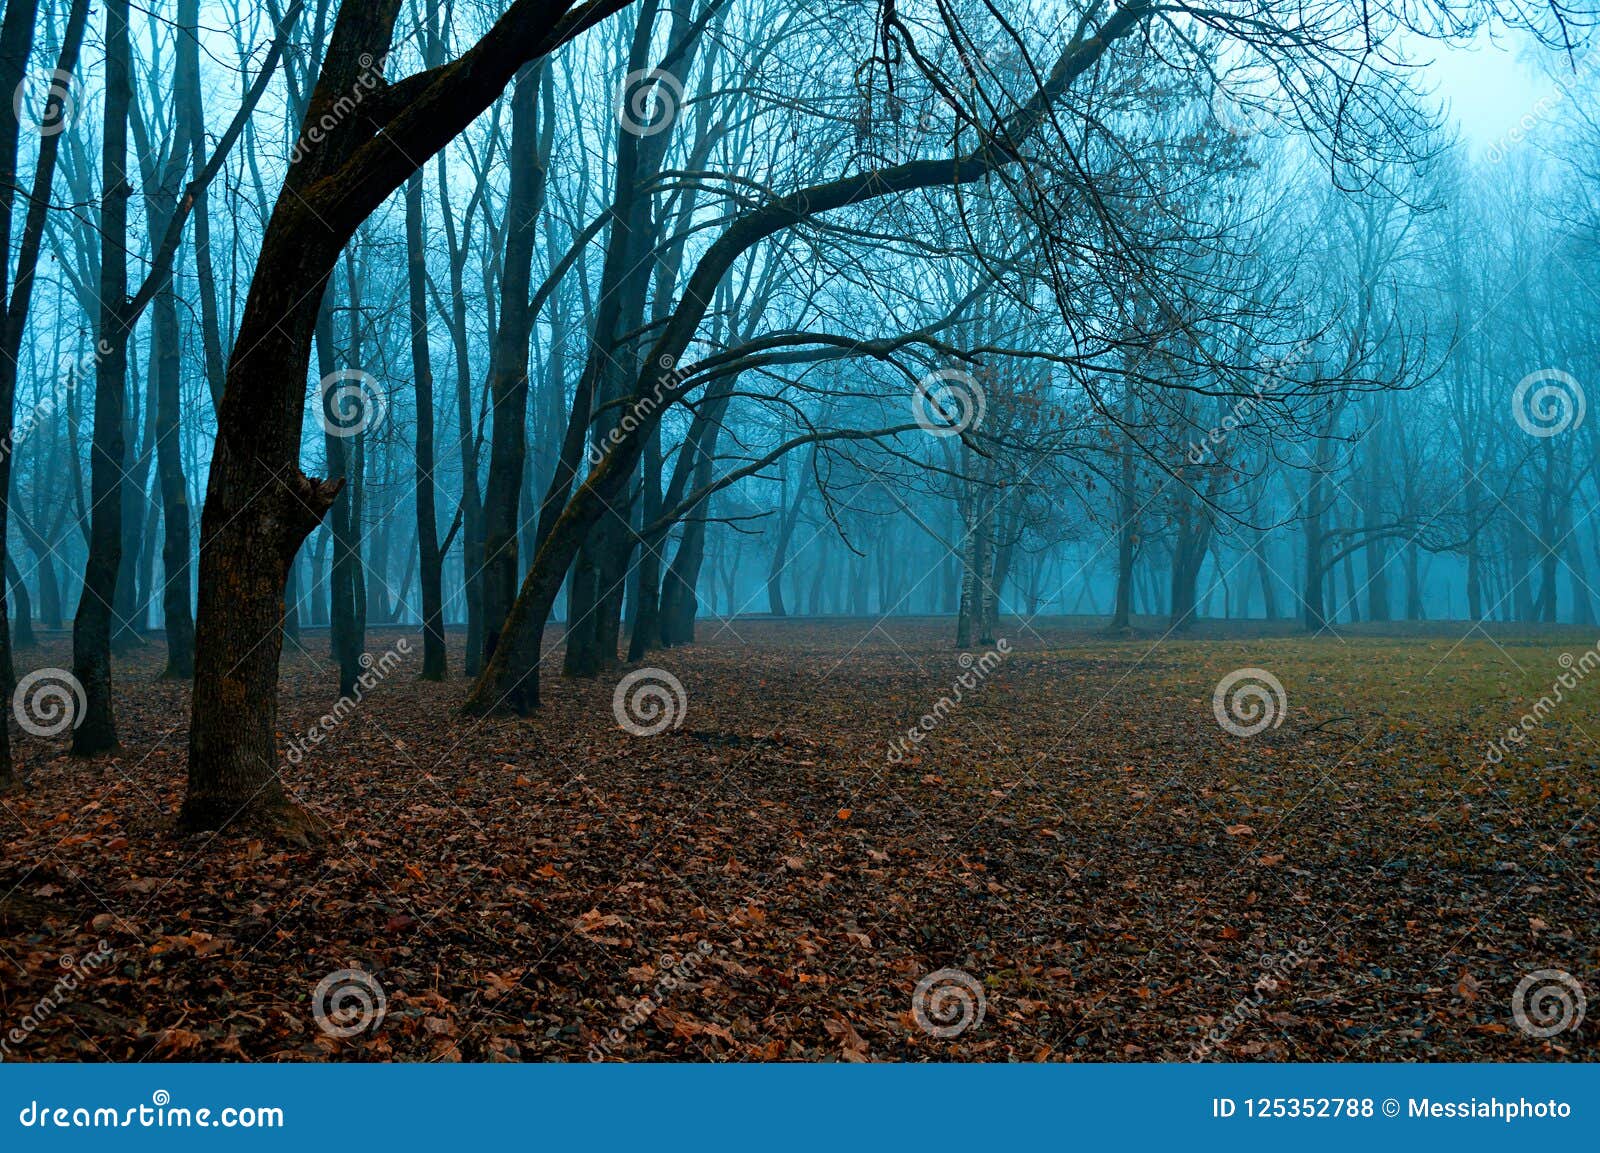 Autumn Misterious Landscape - Foggy Forest with Bare Trees and Fallen